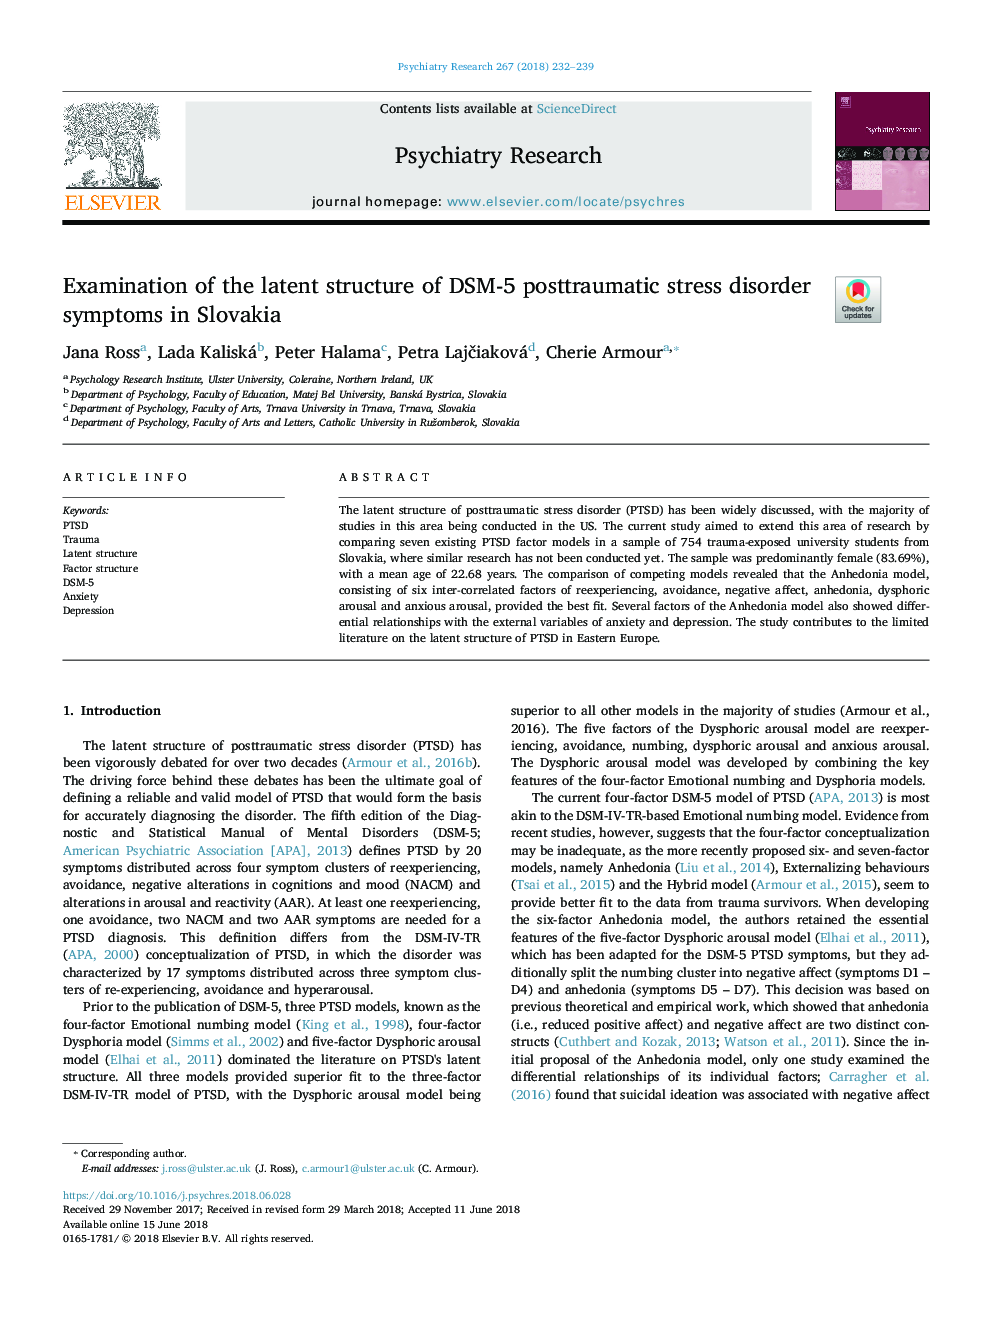 Examination of the latent structure of DSM-5 posttraumatic stress disorder symptoms in Slovakia